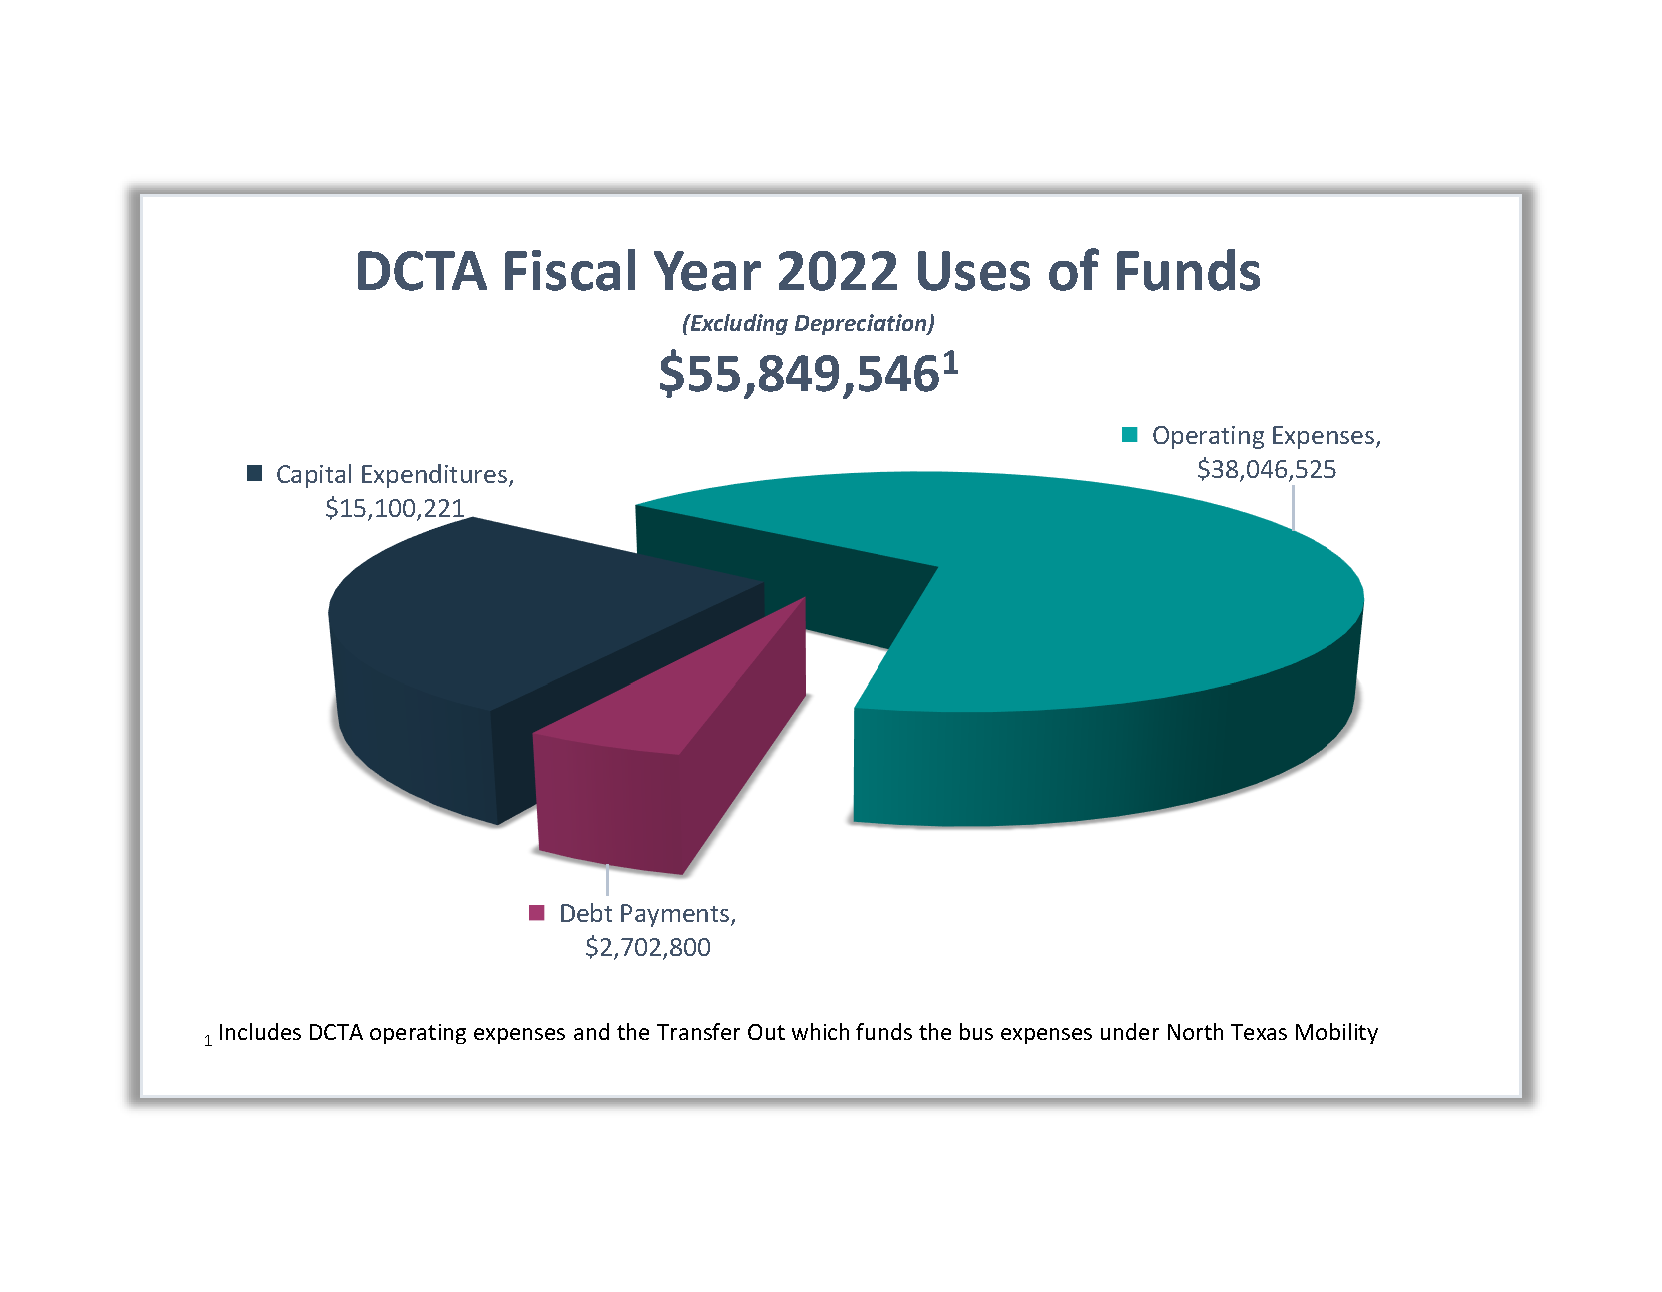 FY22 Uses of Funds